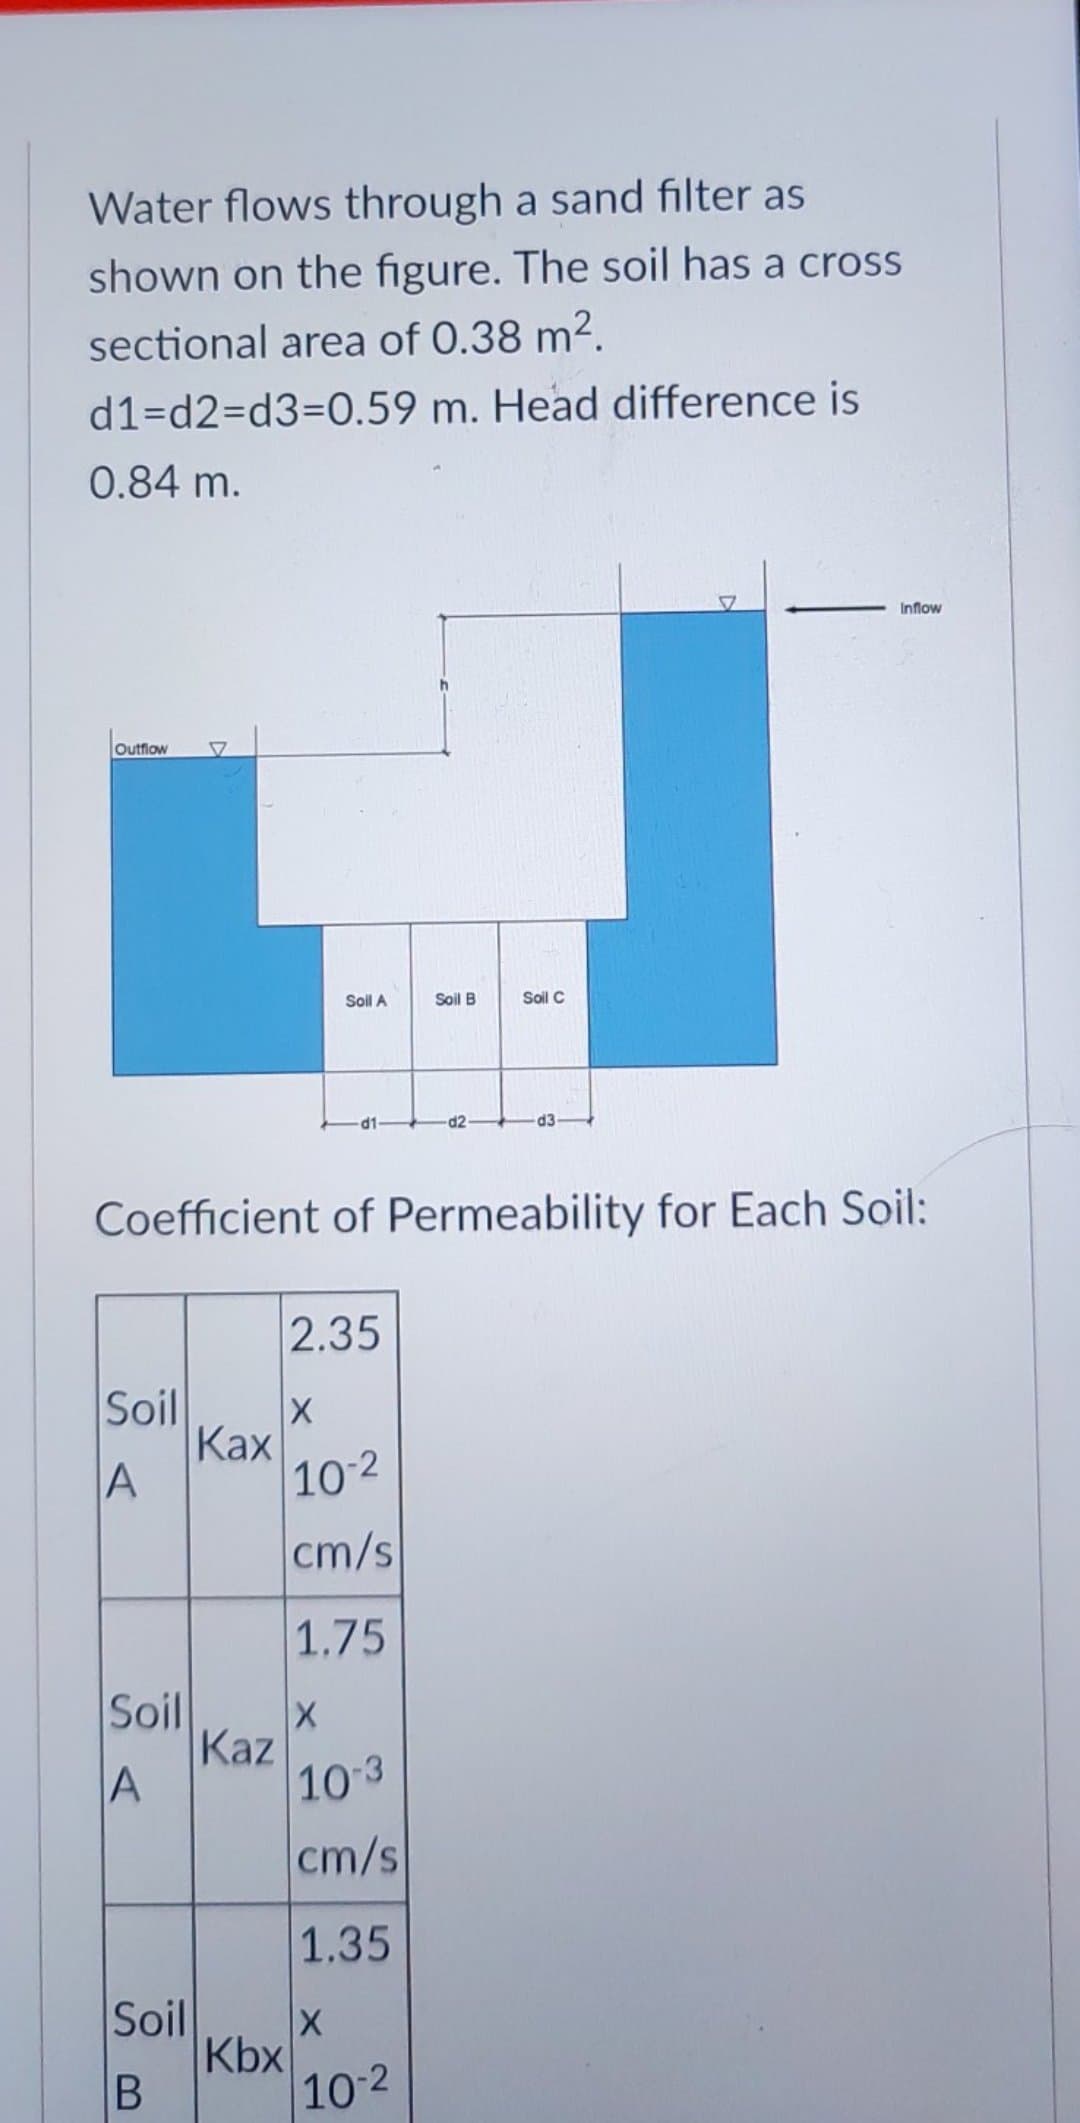 Water flows through a sand filter as
shown on the figure. The soil has a cross
sectional area of 0.38 m².
d1=d2=d3=0.59
m. Head difference is
0.84 m.
Inflow
Outflow
Soil A
Soil B
Soil C
-d2-
Coefficient of Permeability for Each Soil:
2.35
Soil
X
A
10-2
cm/s
1.75
Soil
Kaz
X
A
10-3
cm/s
1.35
Soil X
Kbx
B
Kax
10-2